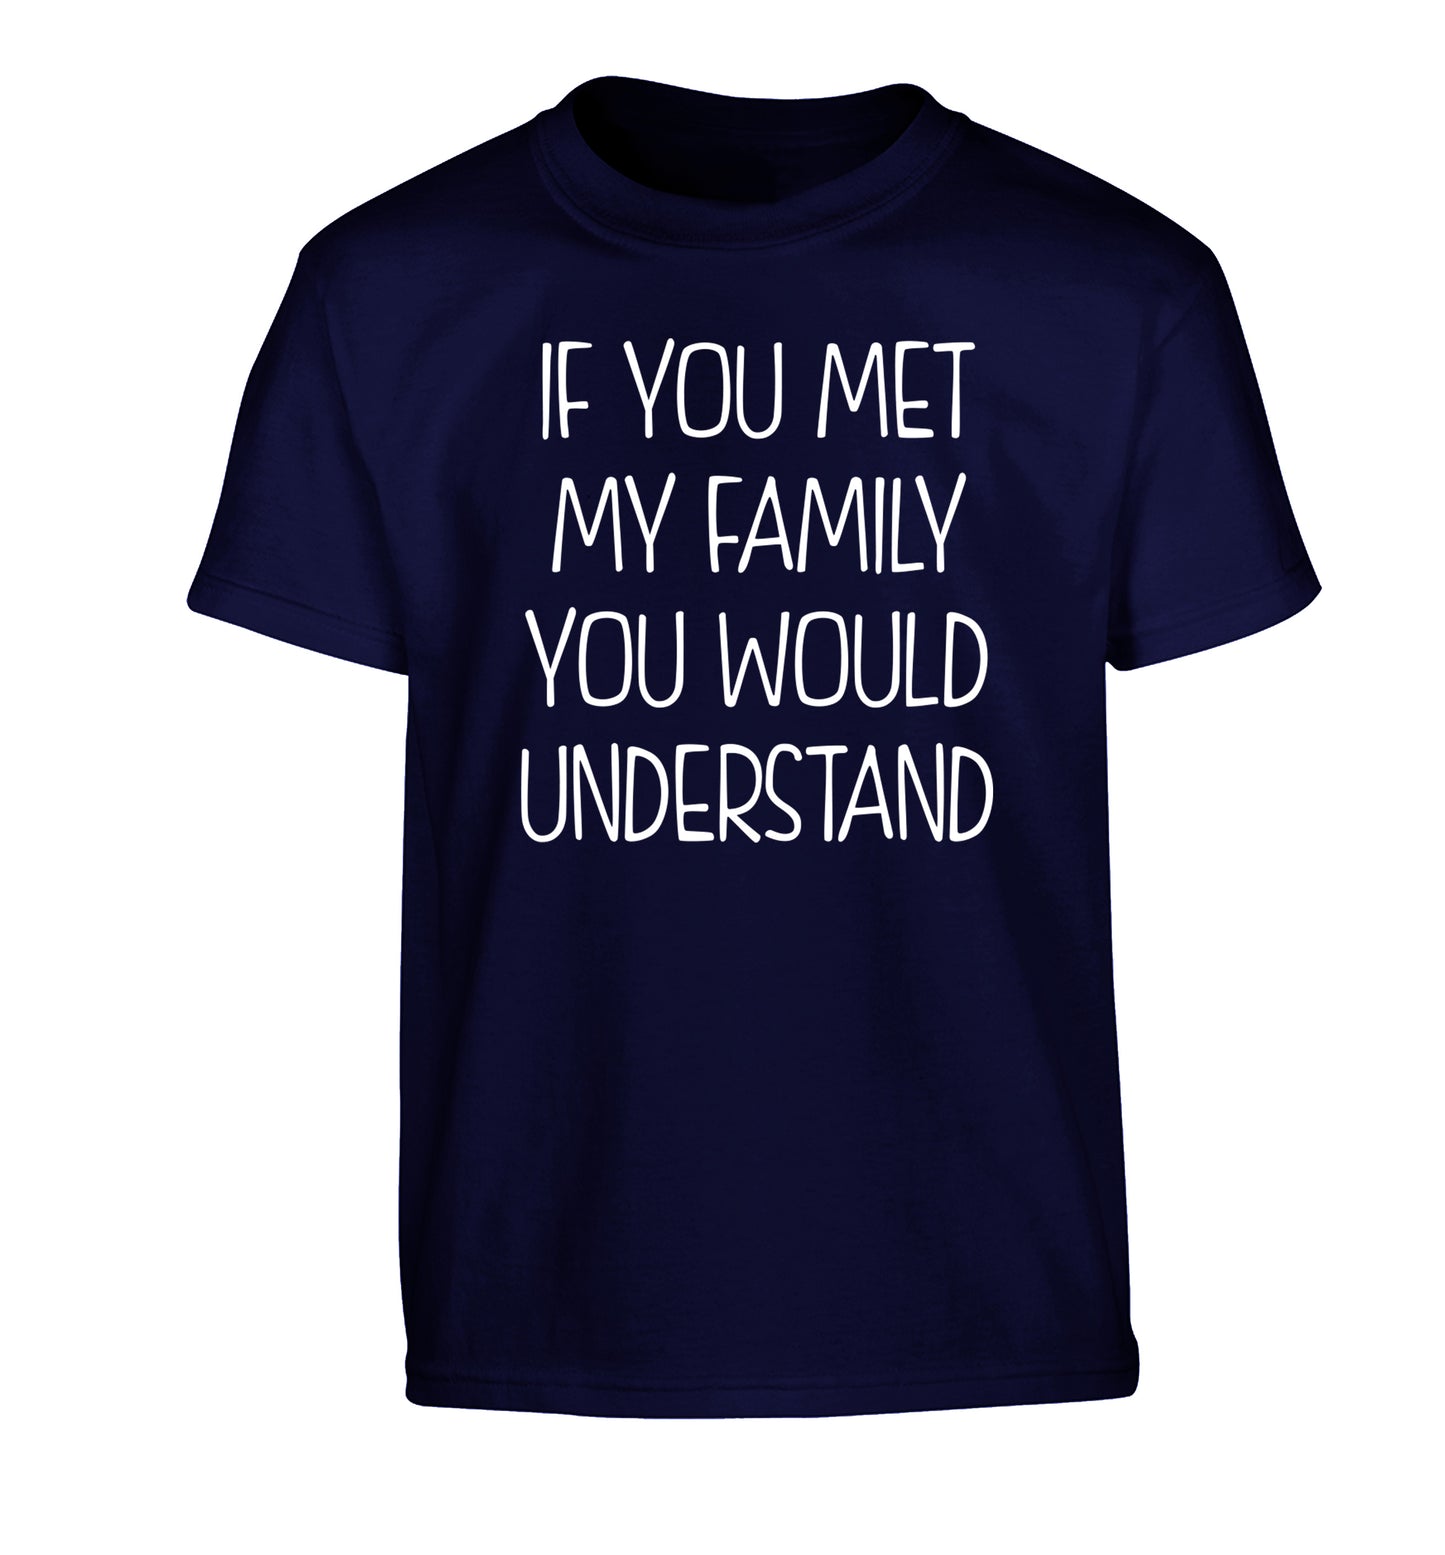 If you met my family you would understand Children's navy Tshirt 12-13 Years